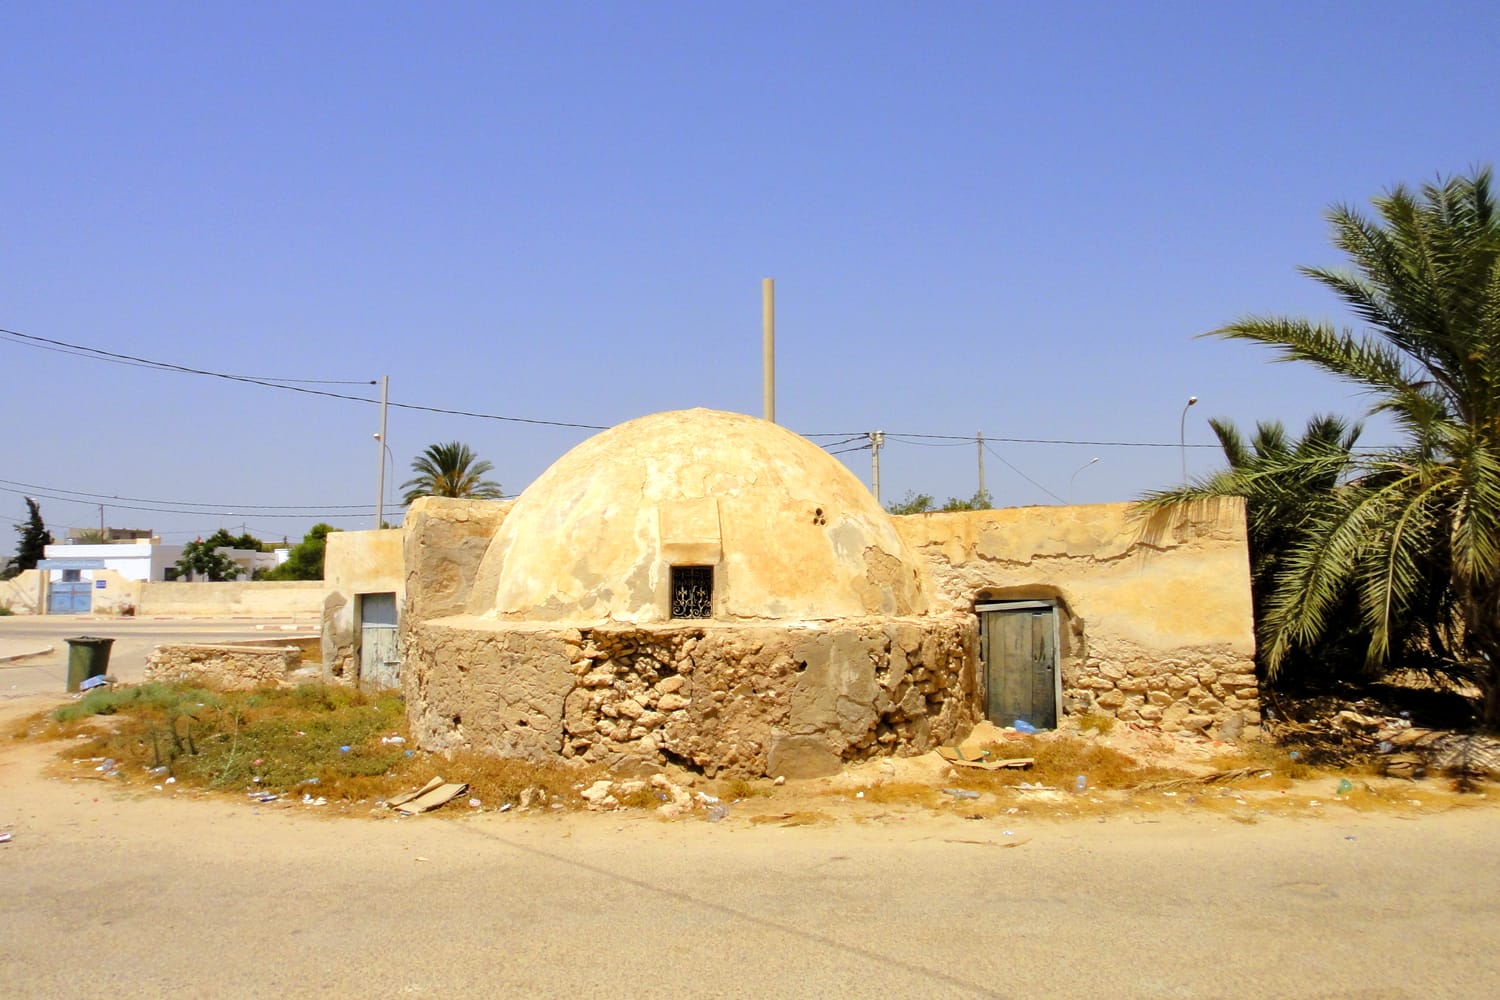 Modern Day Exterior Of The Filming Location Of A Spaceport Cantina Scene. Town Of Ajim On Djerba Island, Tunisia